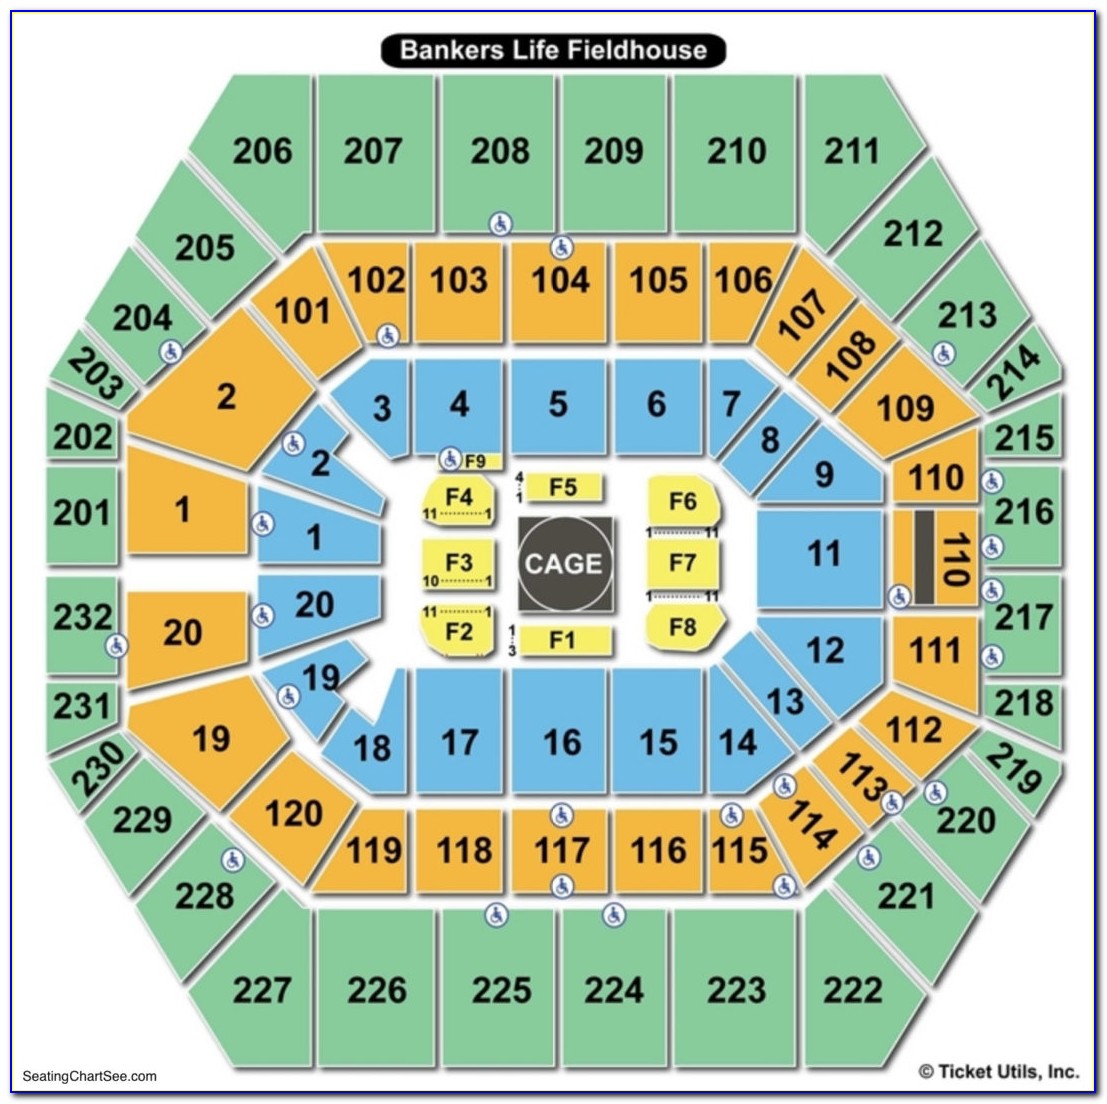 Bankers Life Fieldhouse Seating Chart Virtual